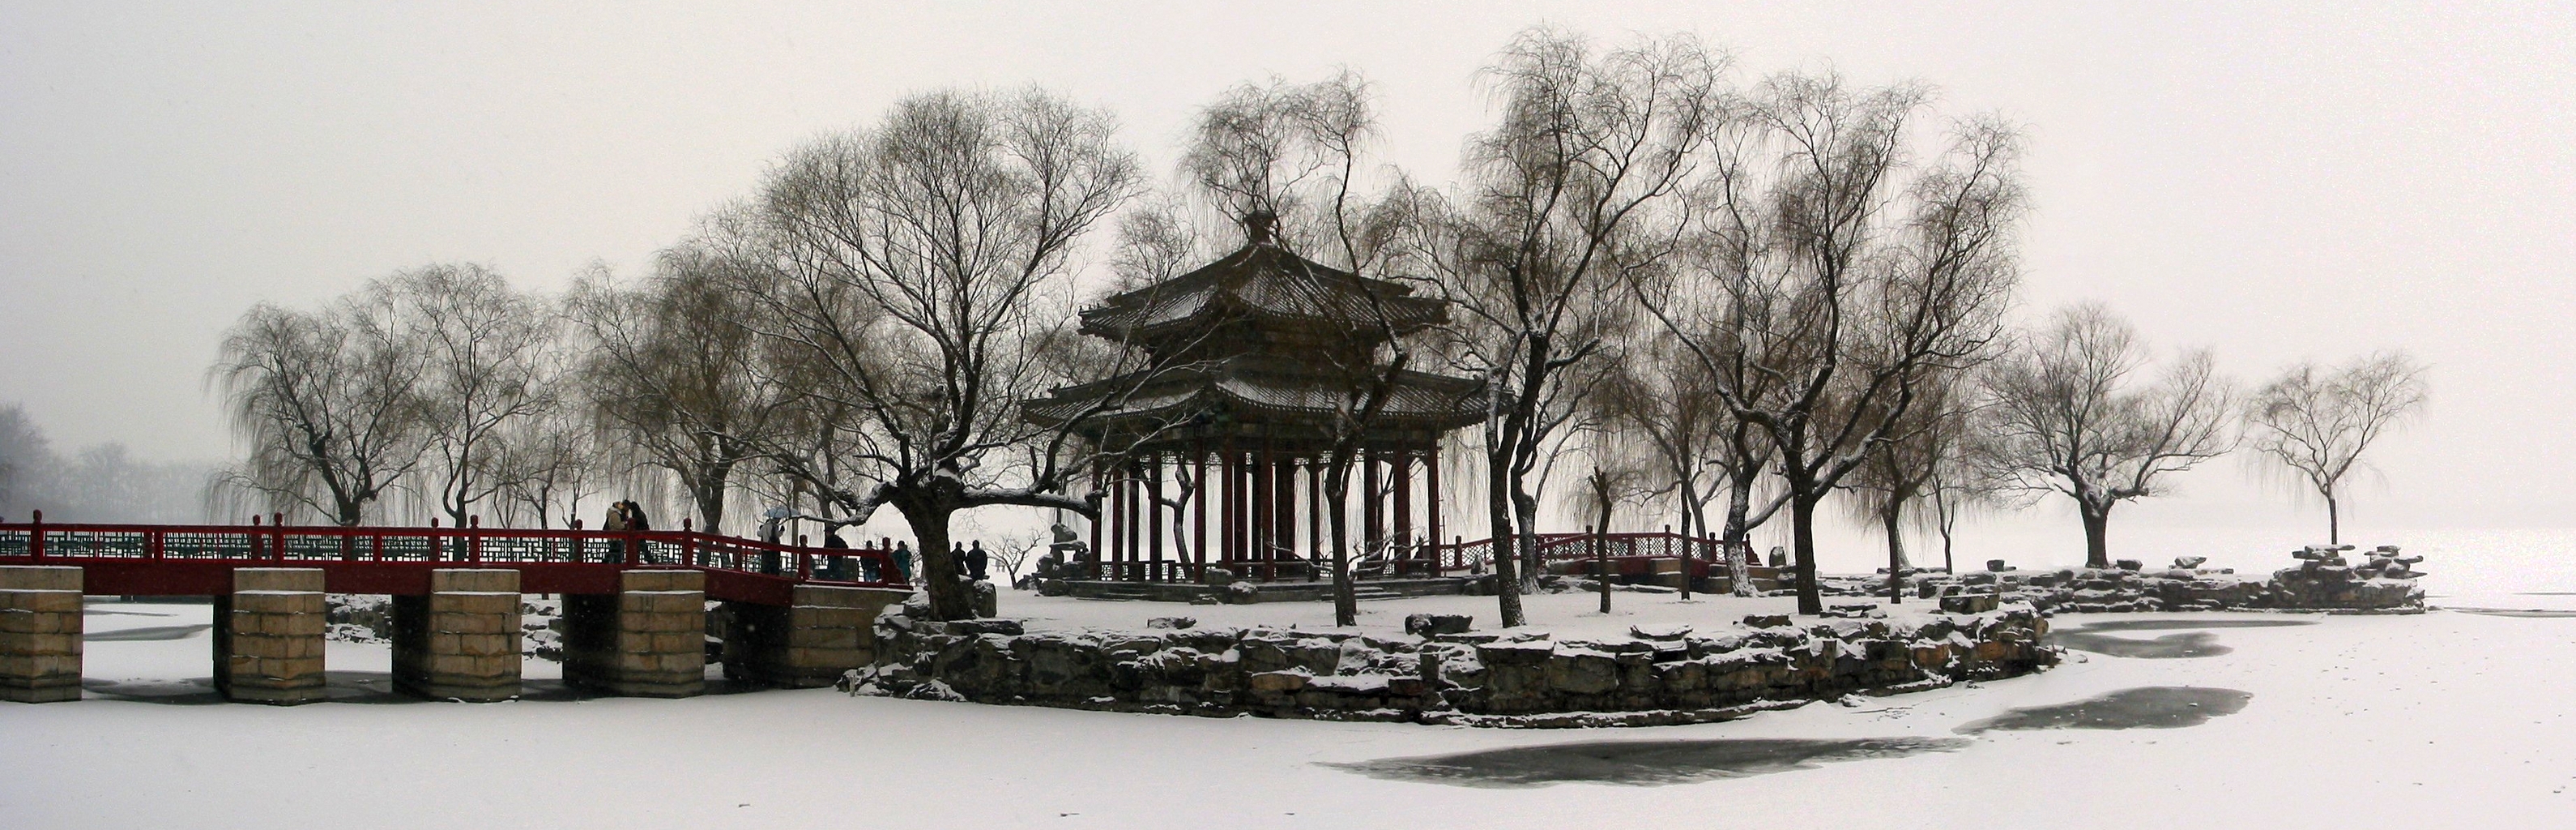 Summer Palace In Winter Desktop And Mobile Wallpaper Wallippo